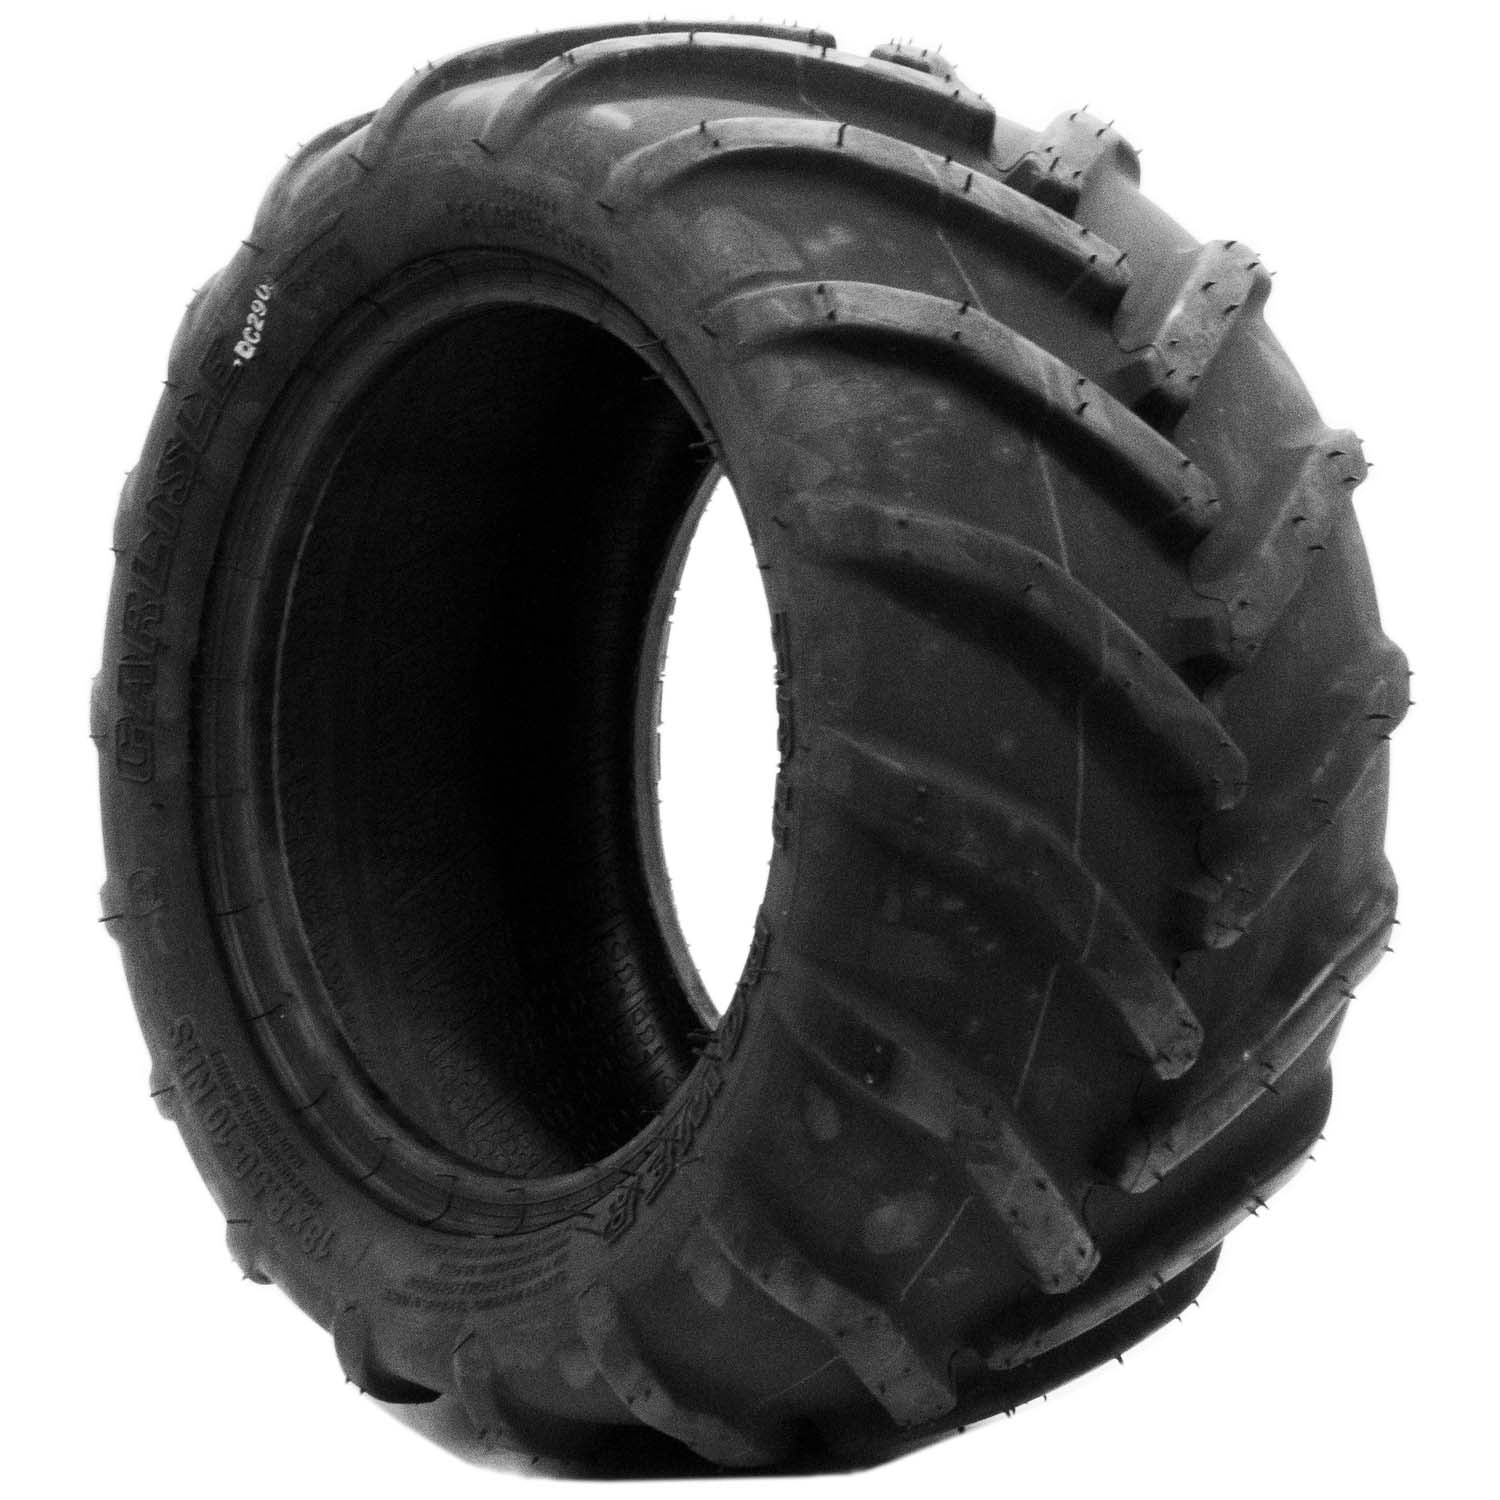 Carlisle Tru Power Lawn and Garden Traction Tire 4ply 18x8.50-10